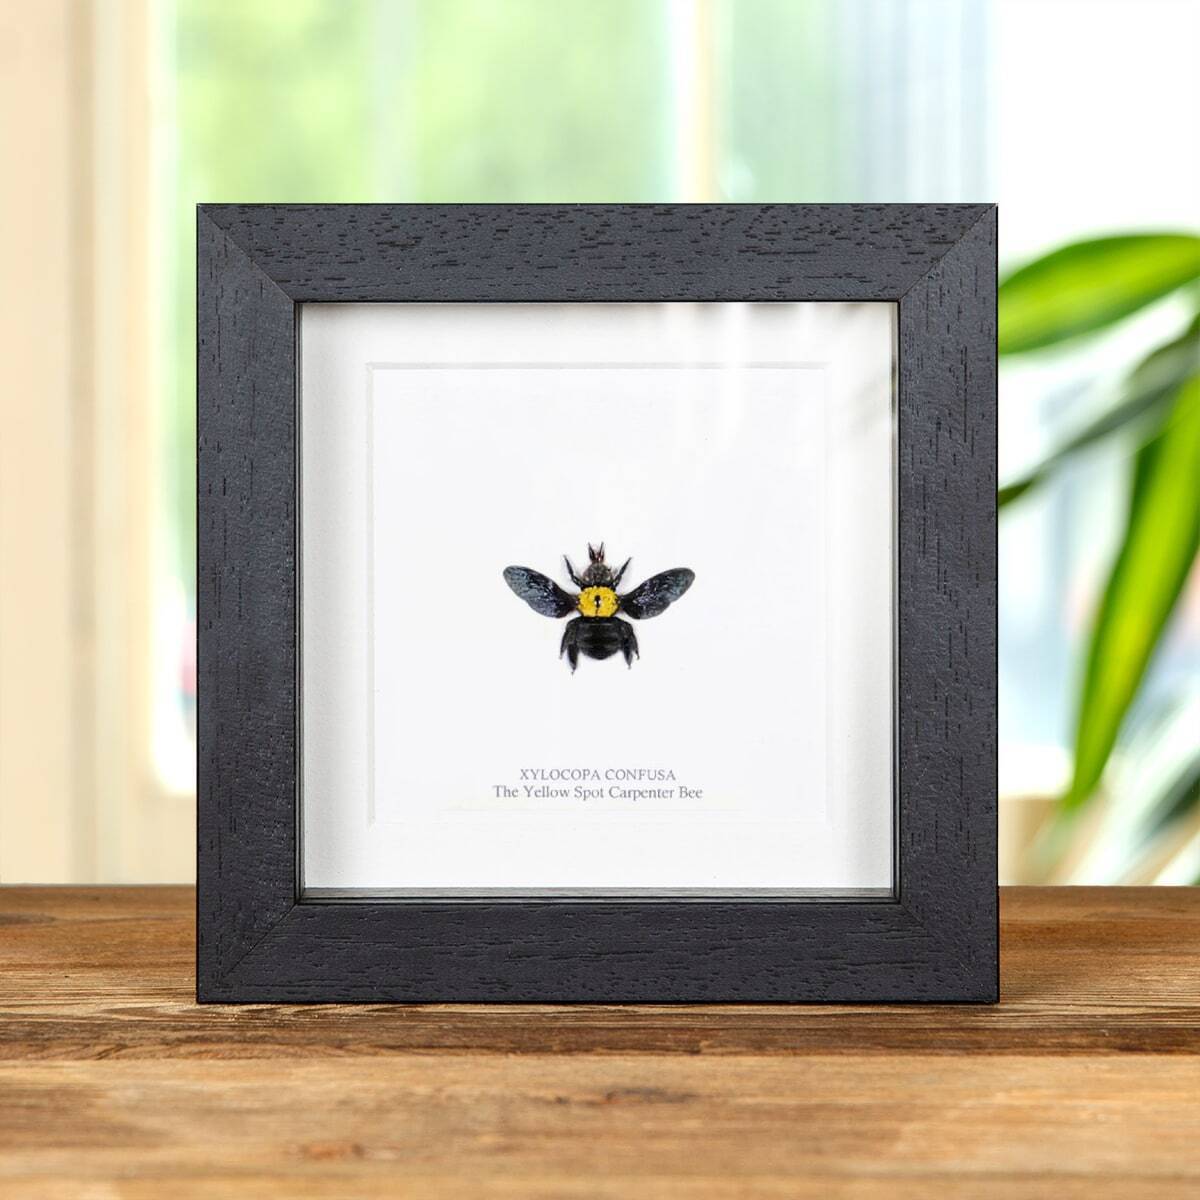 The Yellow Spot Carpenter Taxidermy Bee Frame (Xylocopa confusa)